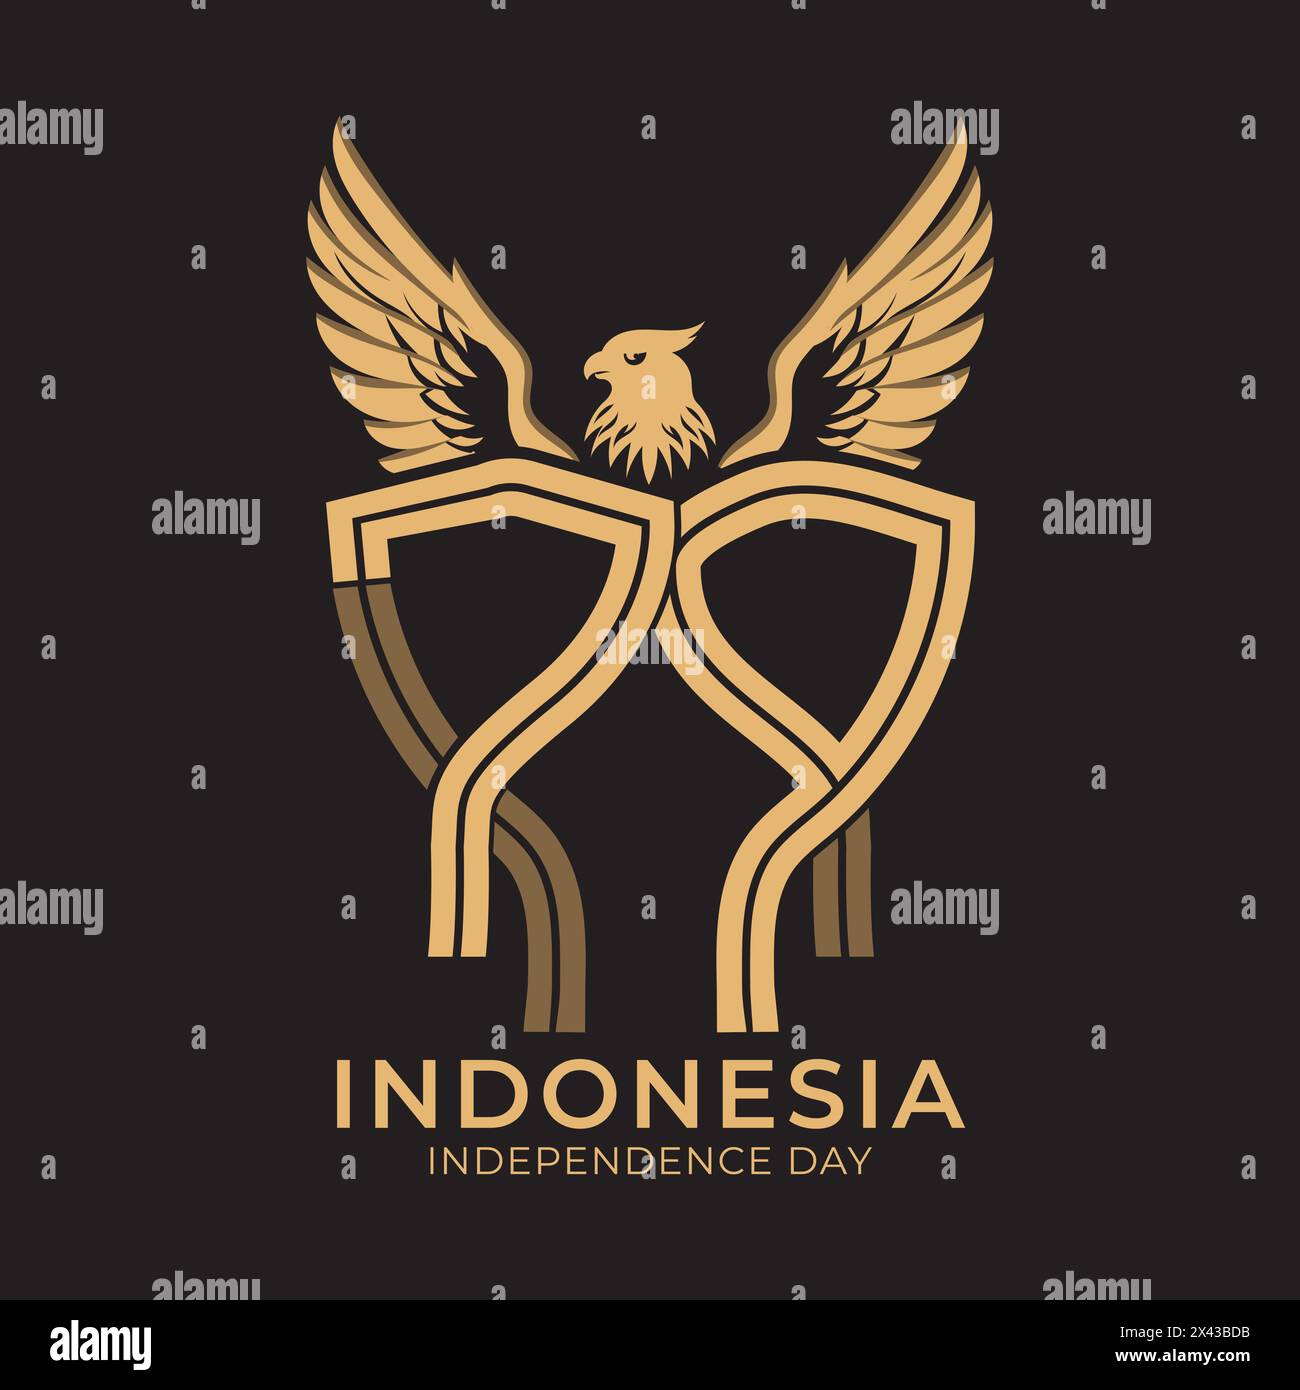 79th Indonesian Independence Day concept logo with golden color of eagle illustration Stock Vector